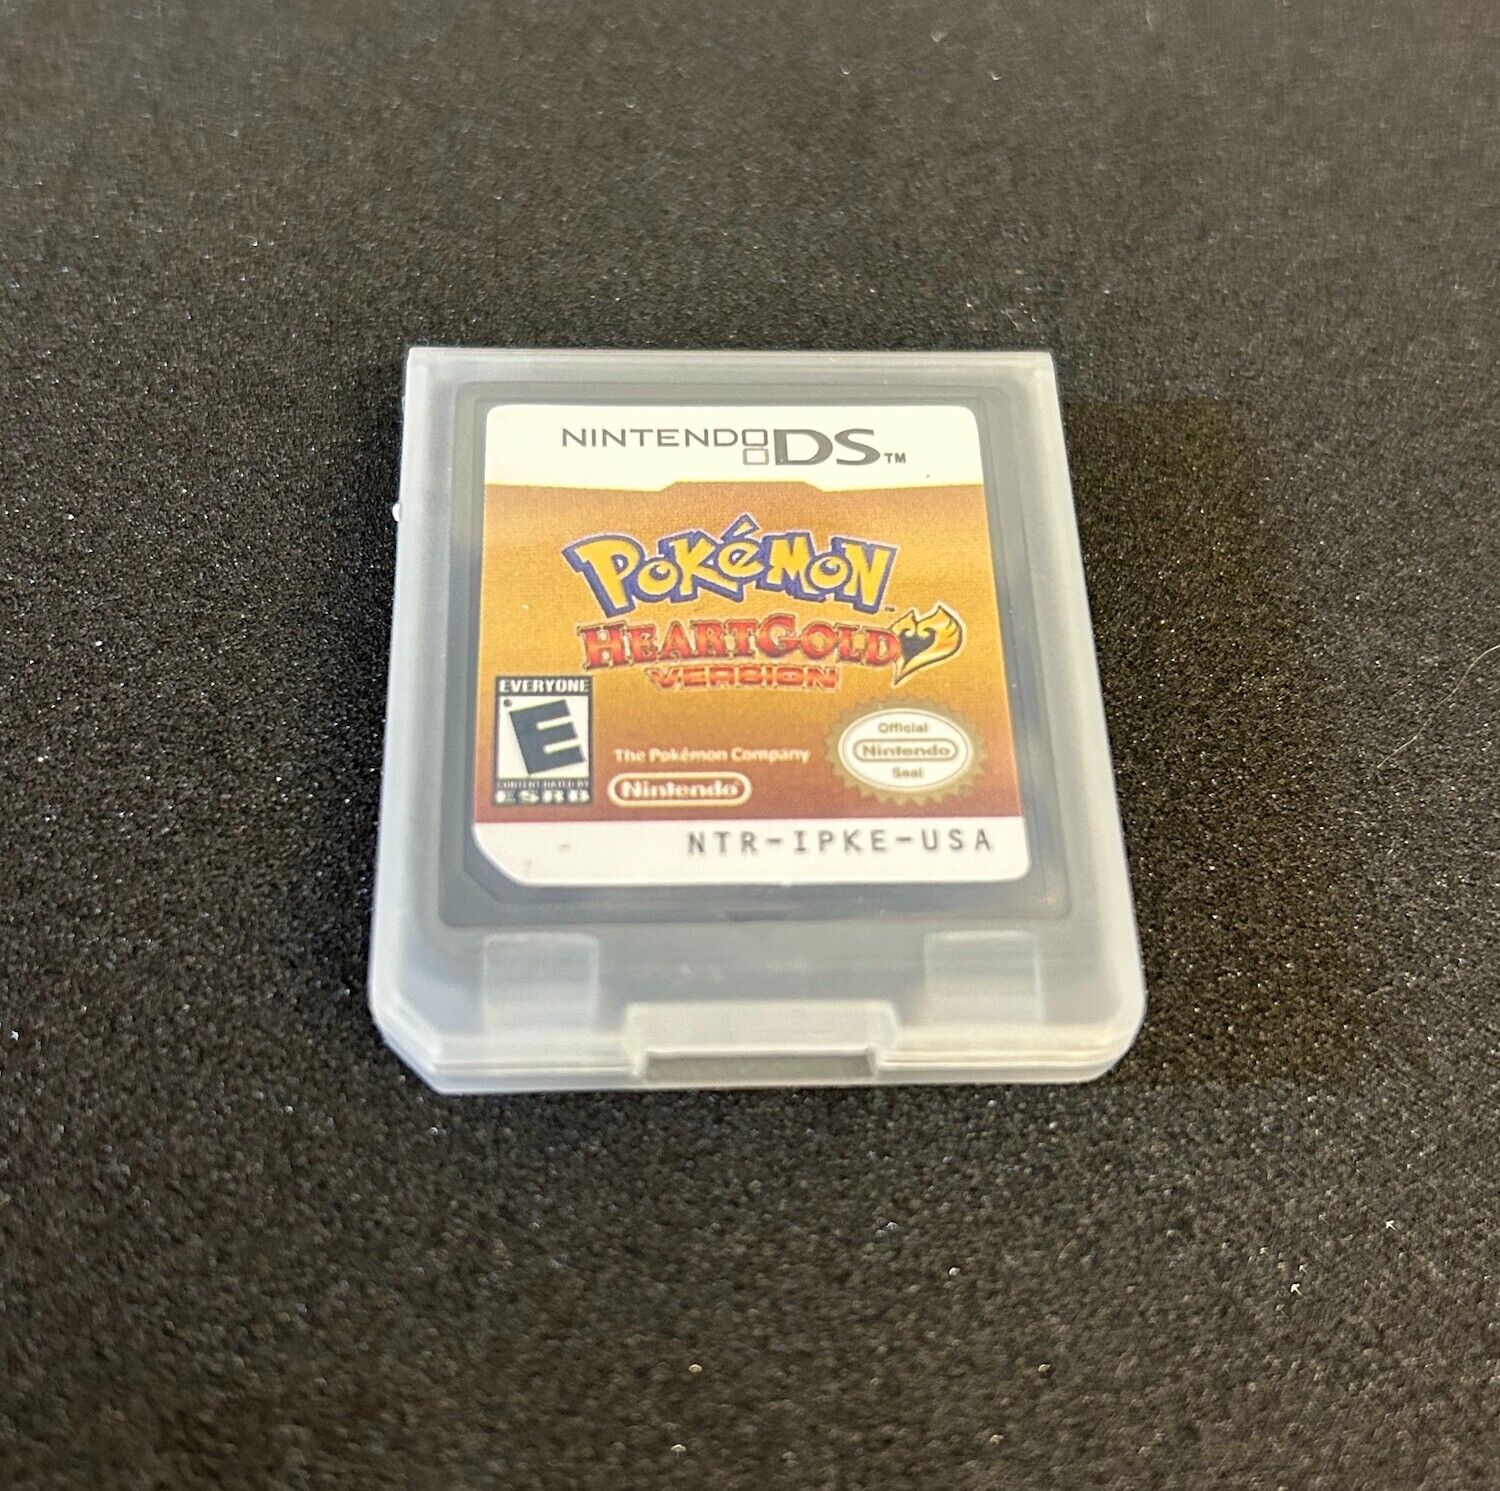 Pokemon HeartGold Version for Nintendo DS NDS 3DS US Game Card 2010 Tested VG US